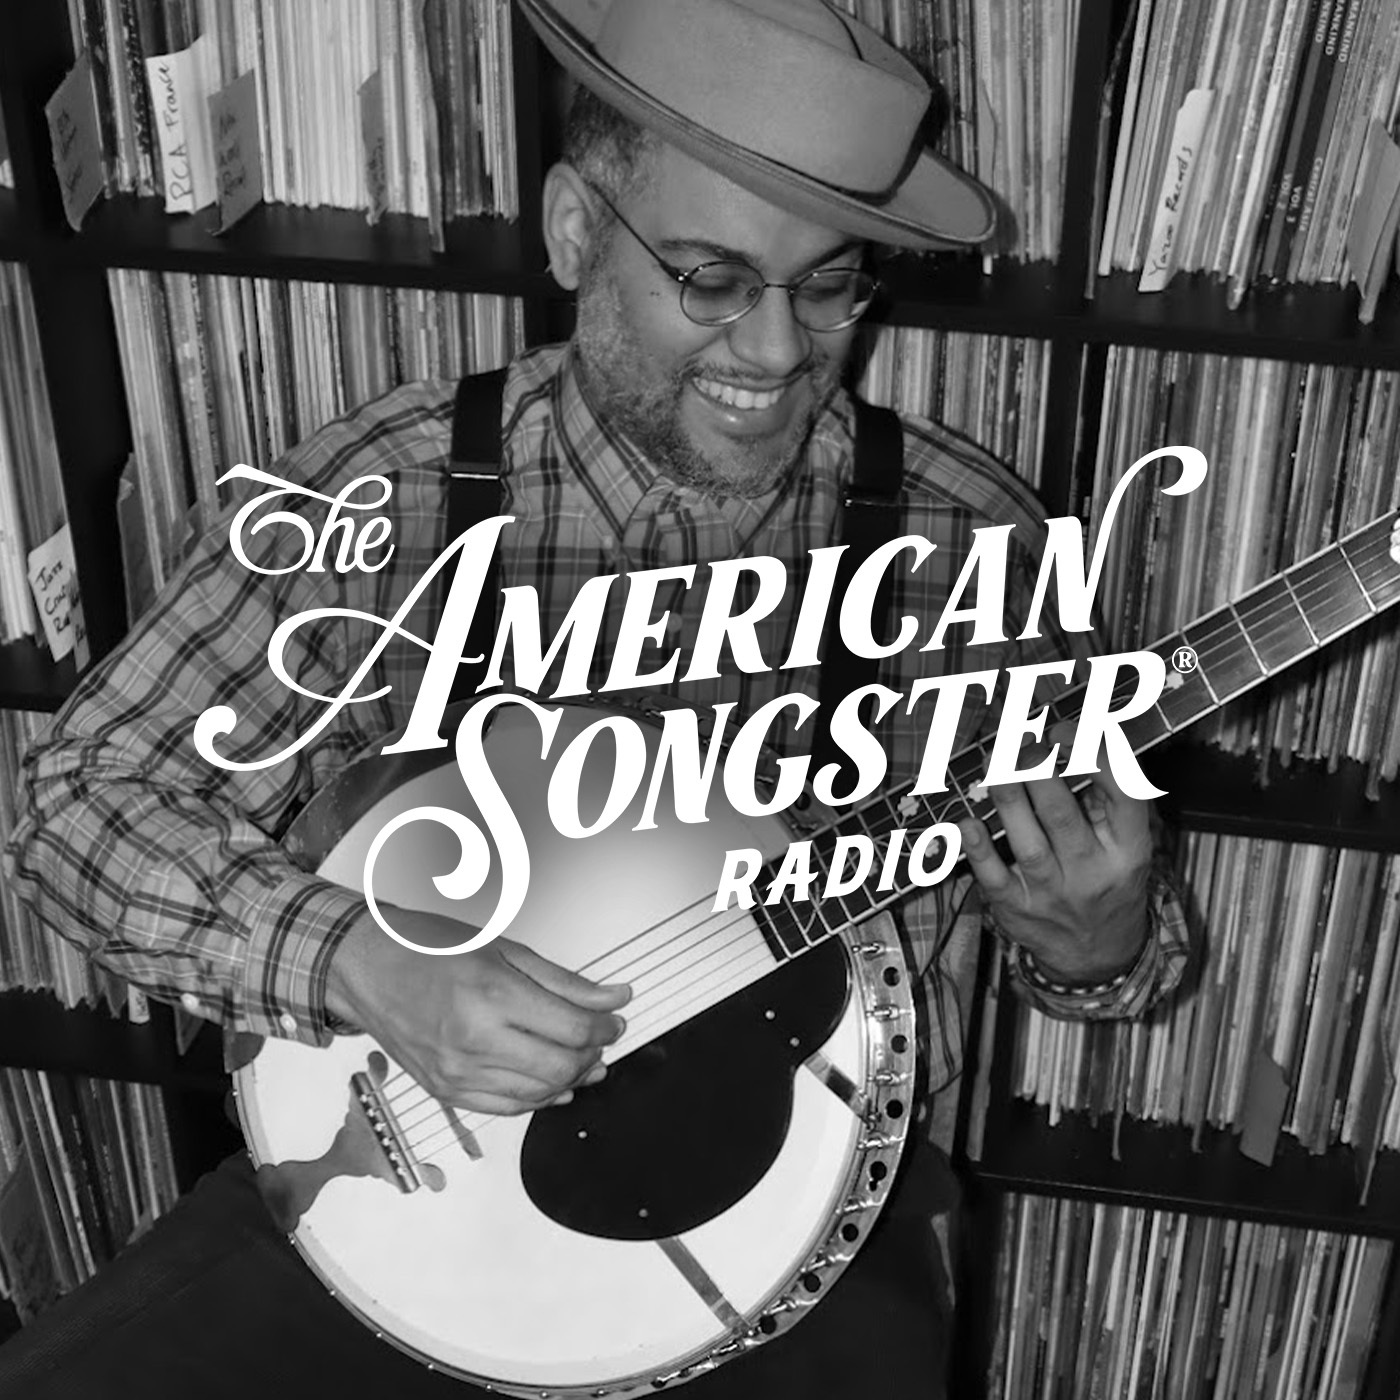 The American Songster Radio